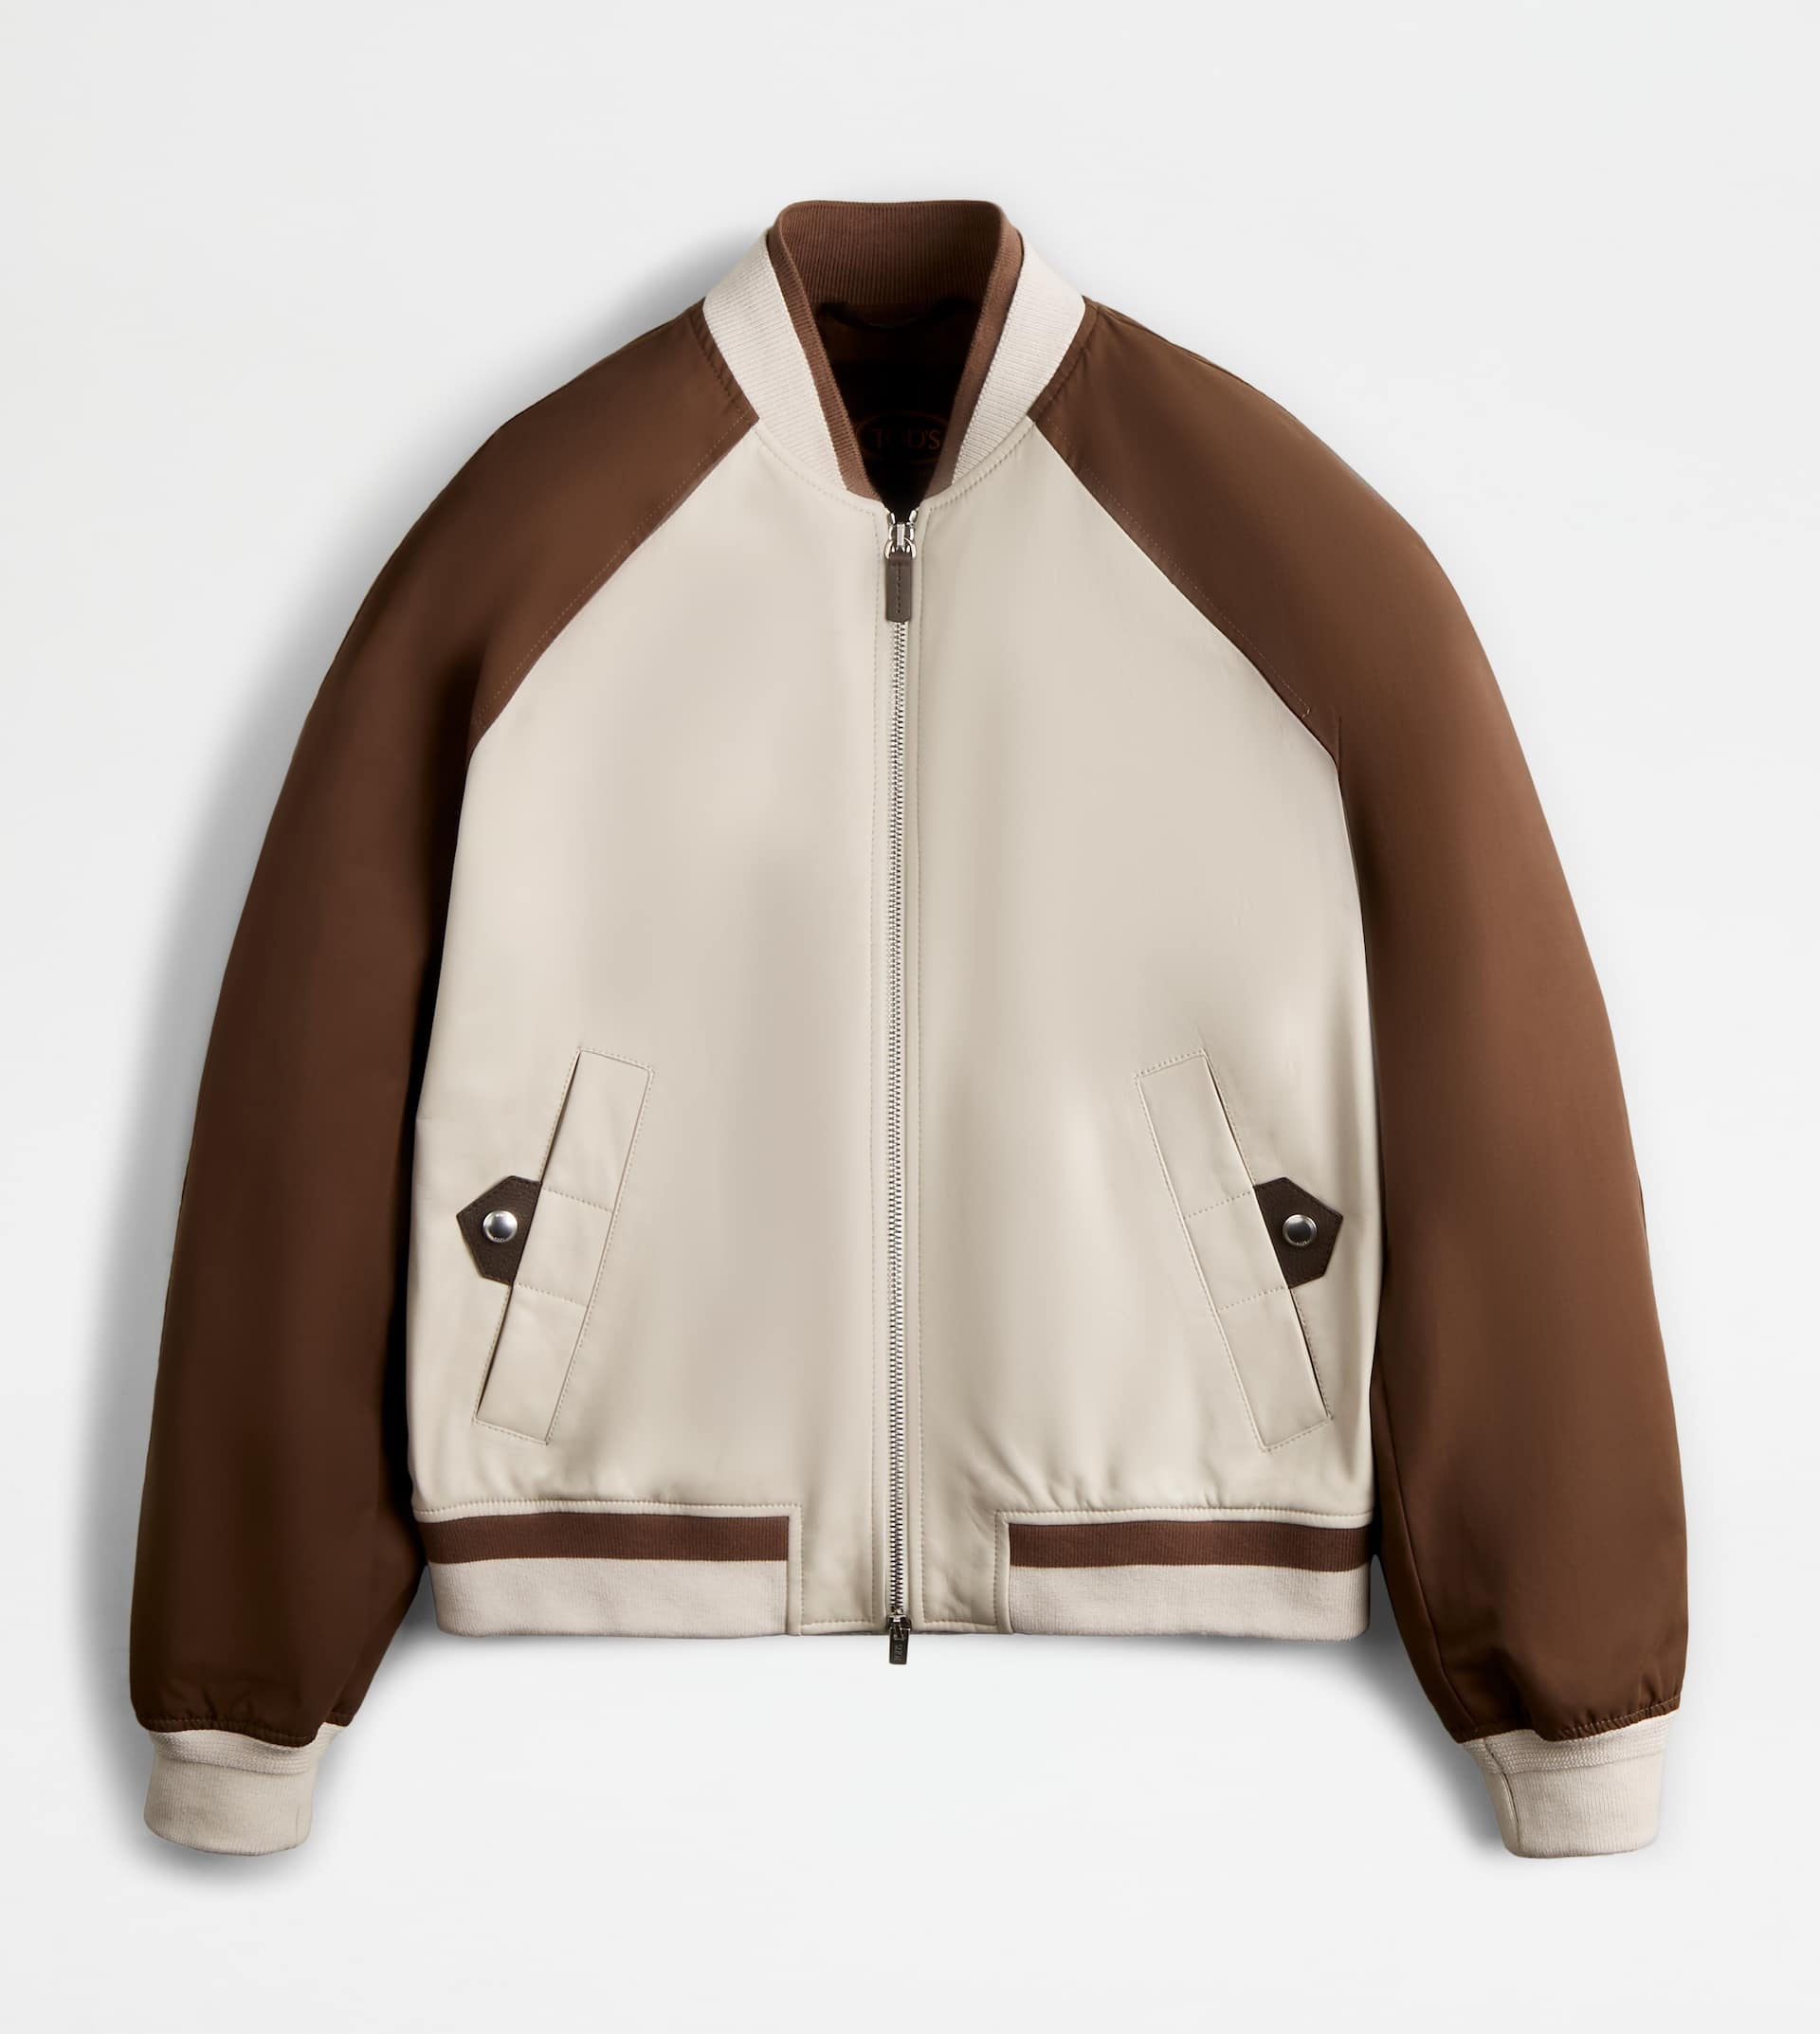 BOMBER JACKET IN LEATHER - BROWN, OFF WHITE - 1